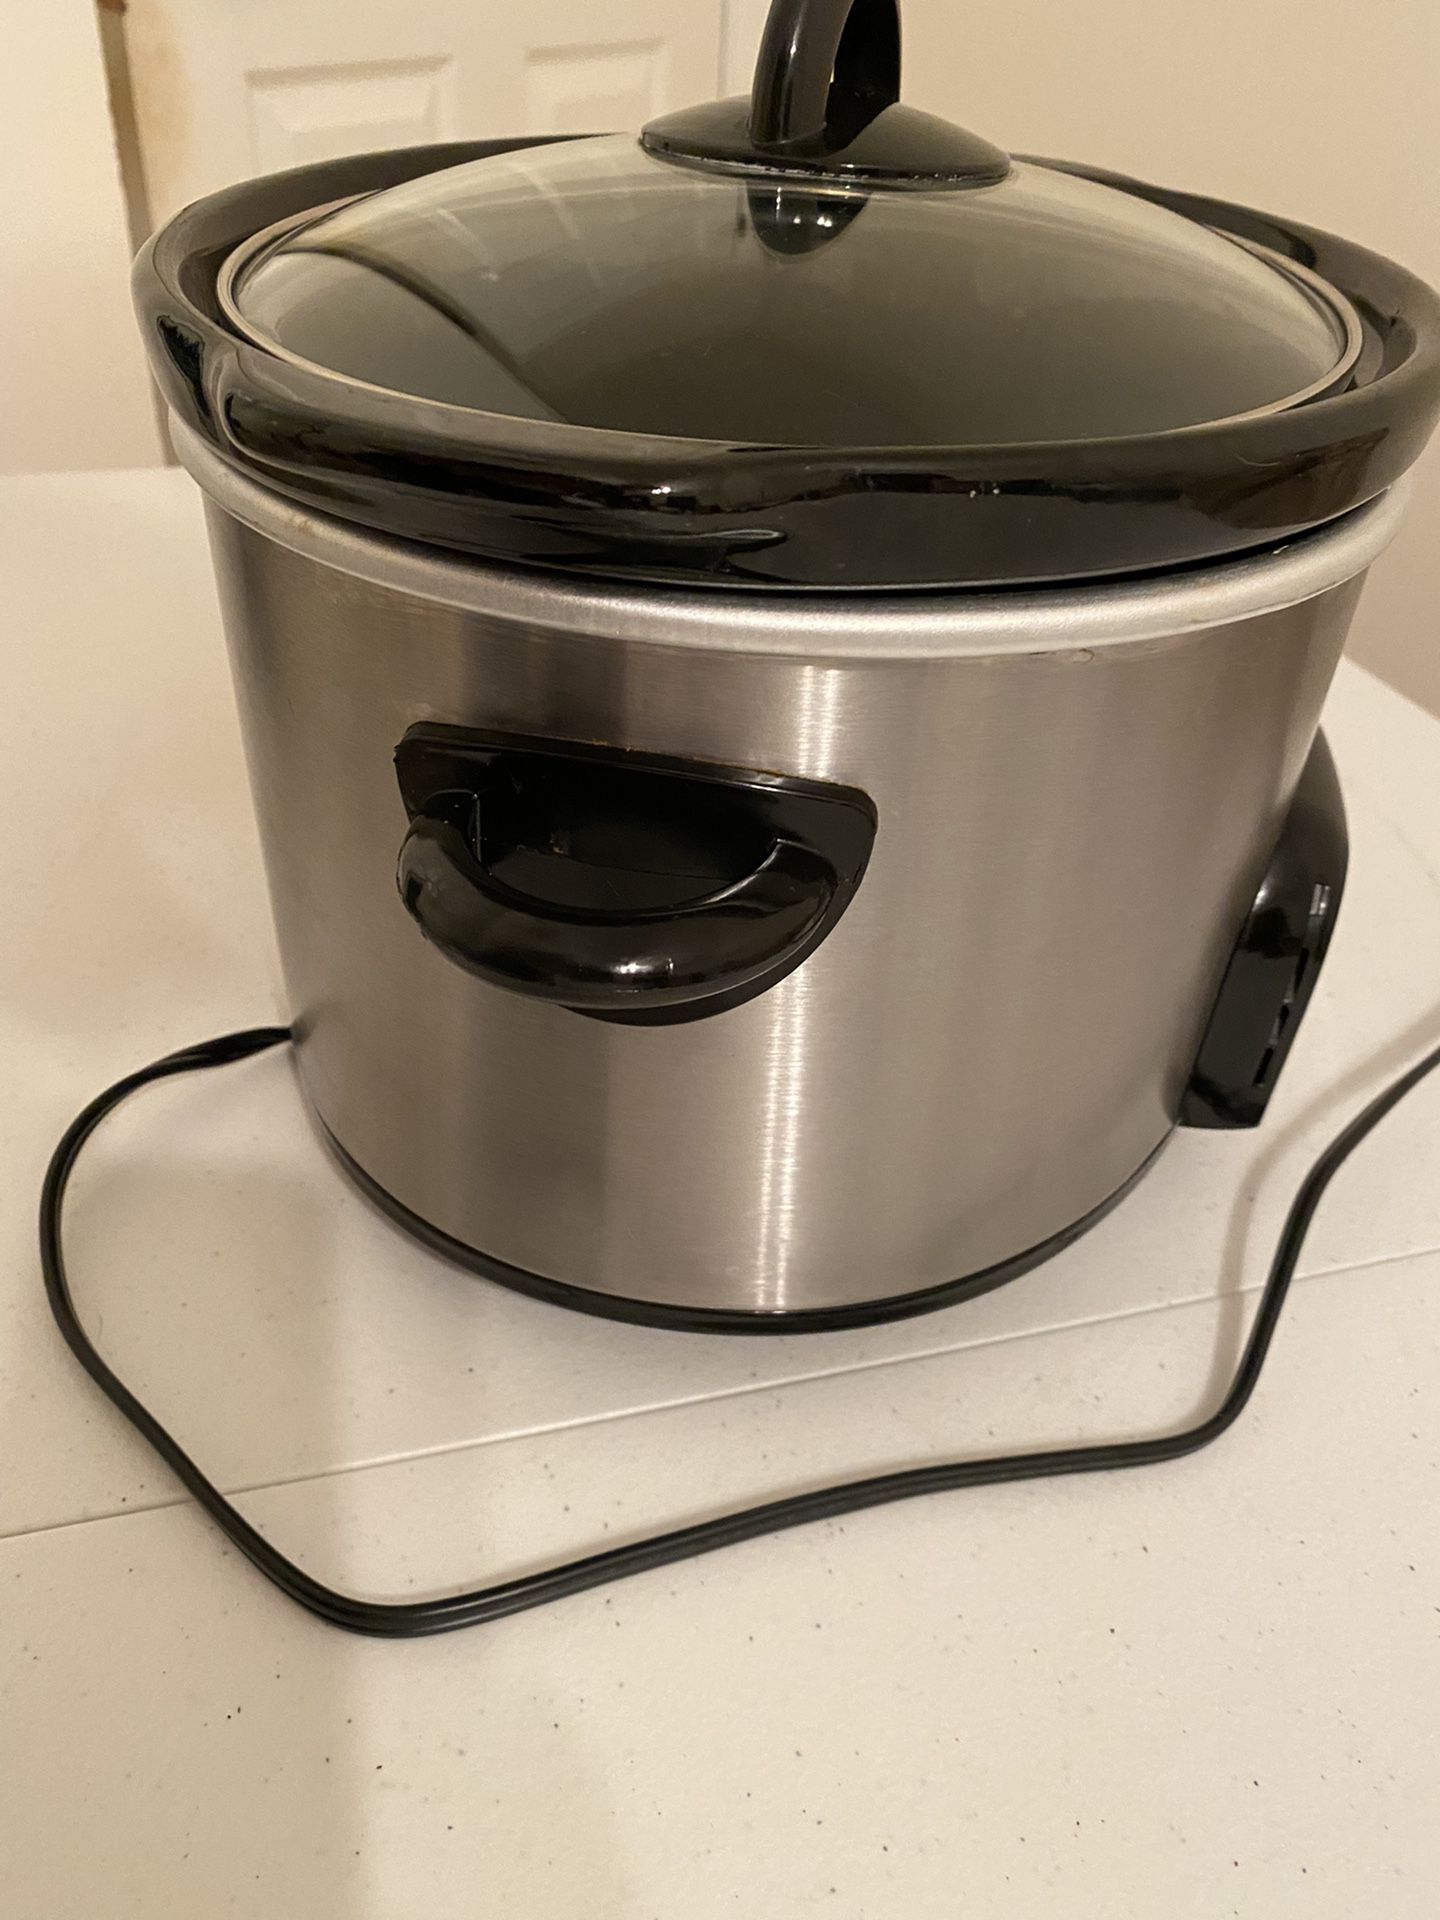 West Bend 4qt Slow Cooker for Sale in Willoughby Hills, OH - OfferUp